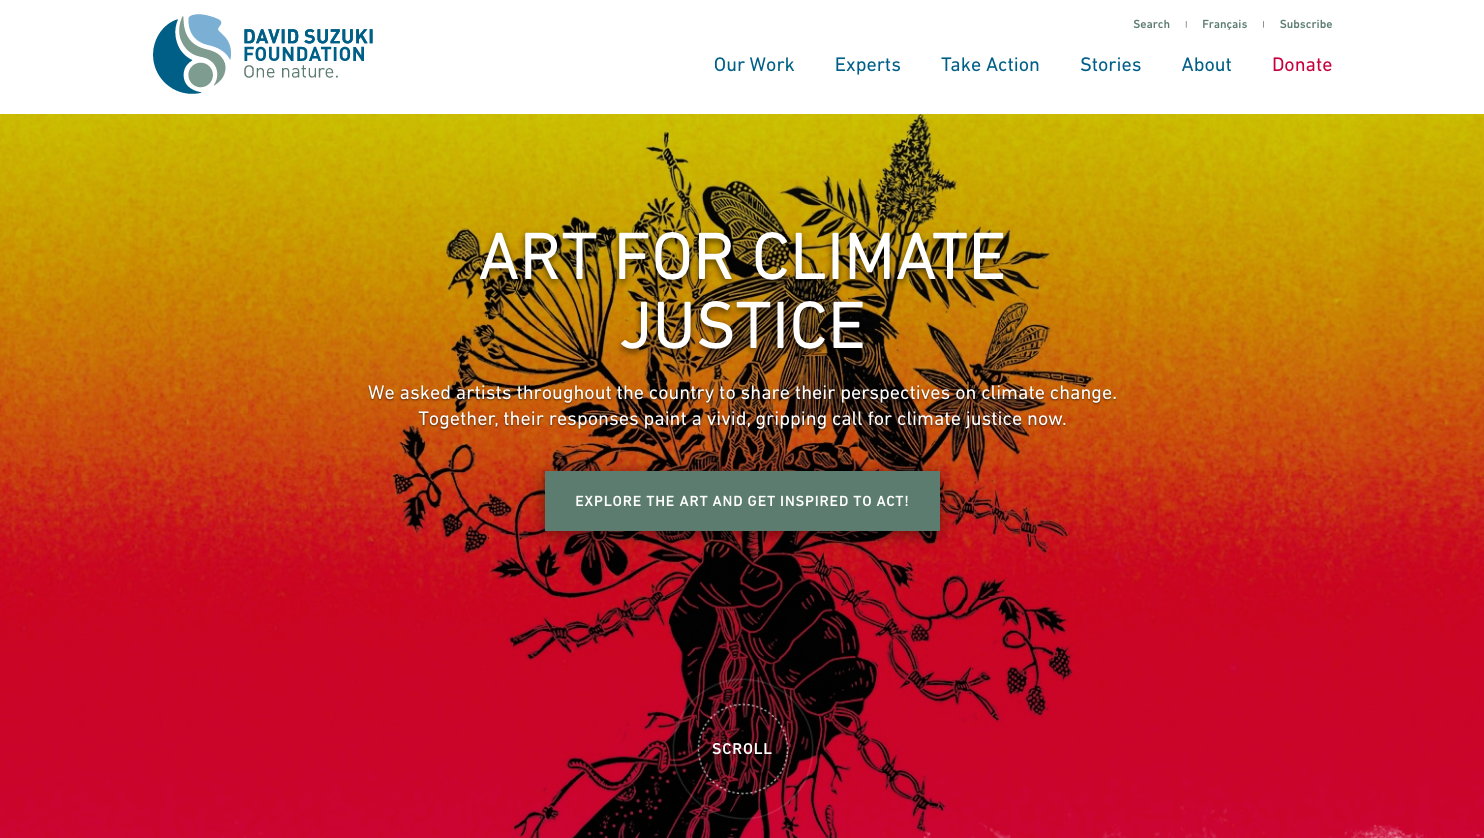 Website layout for David Suzuki Foundation featuring a drawing of a hand and flowers